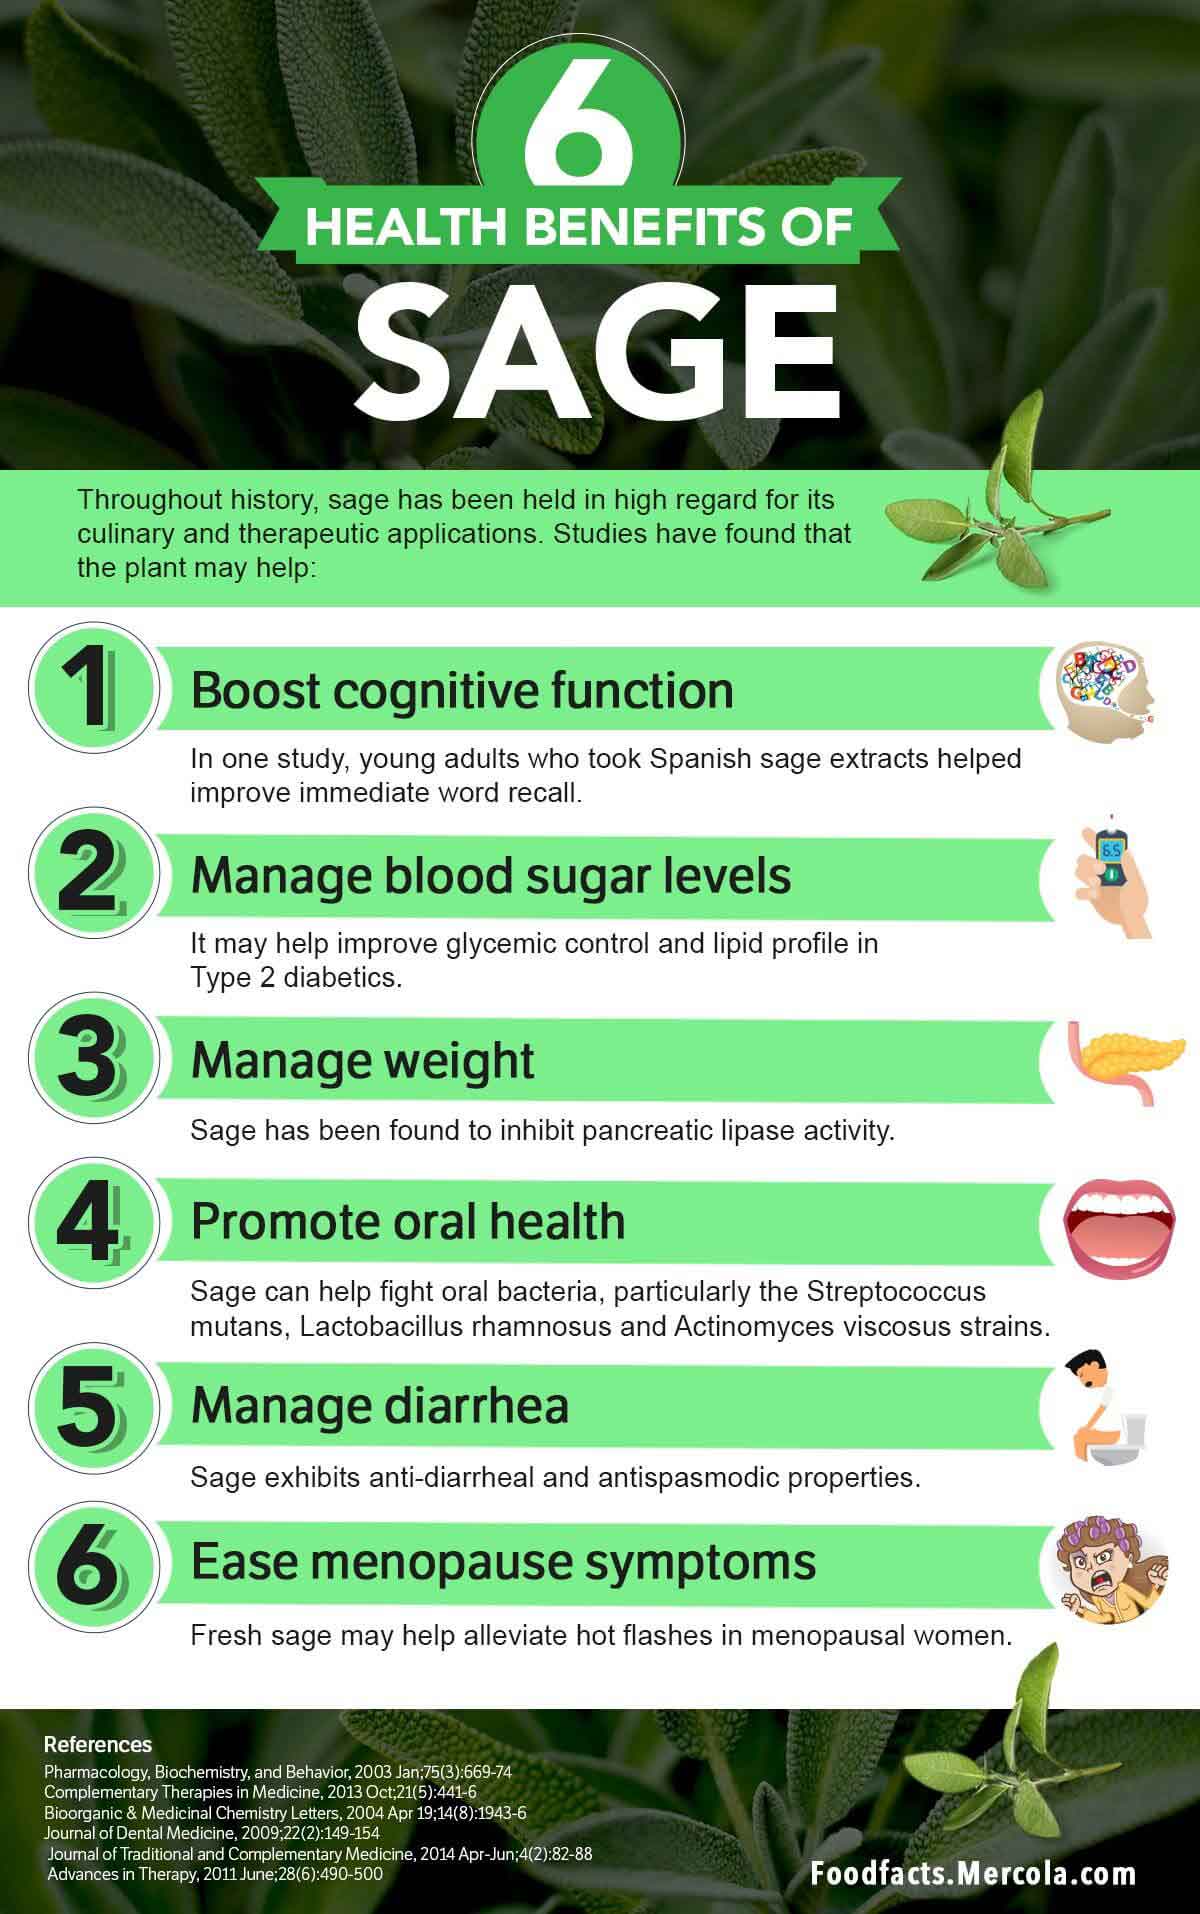 What Is Sage Used For? 6-health-benefits-sage